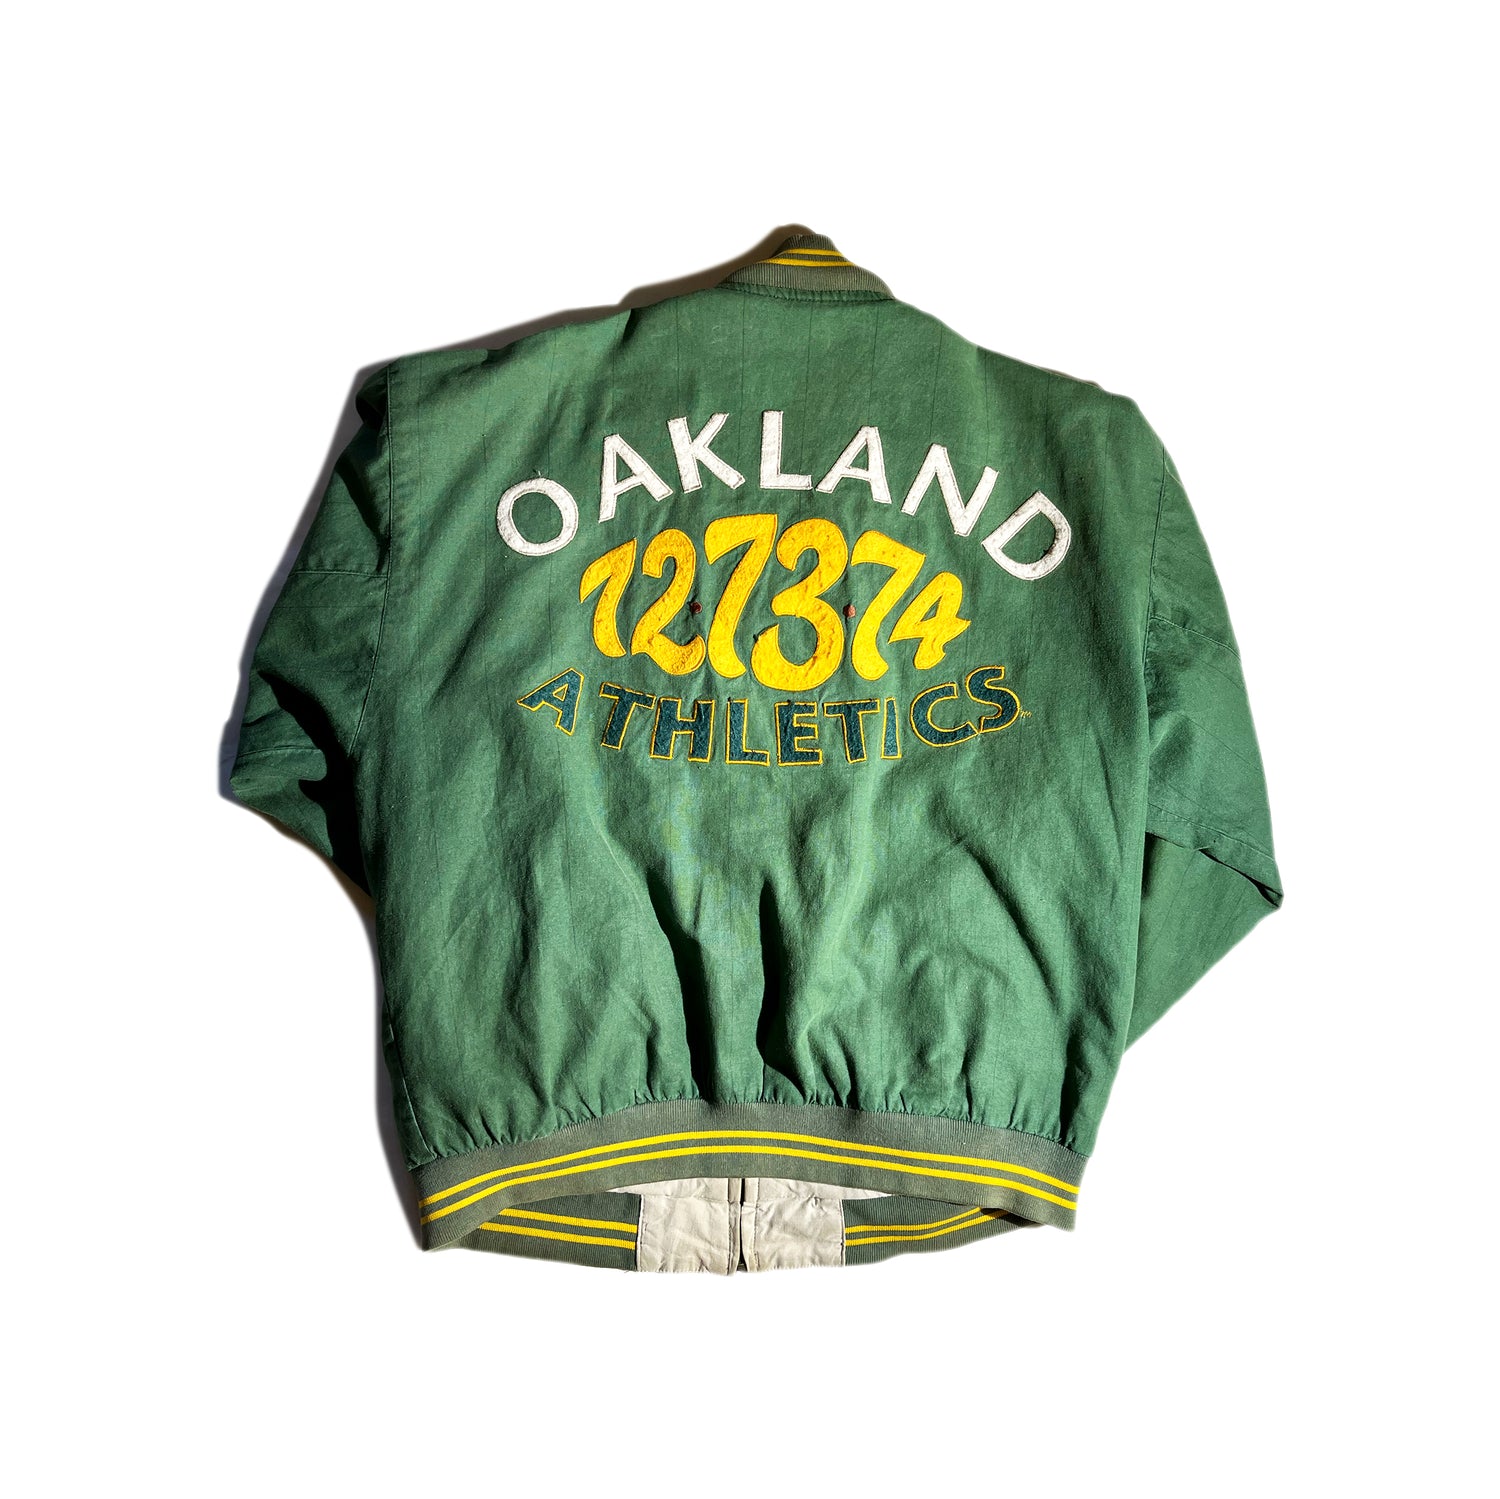 Official Oakland Athletics Cooperstown Collection Gear, Vintage